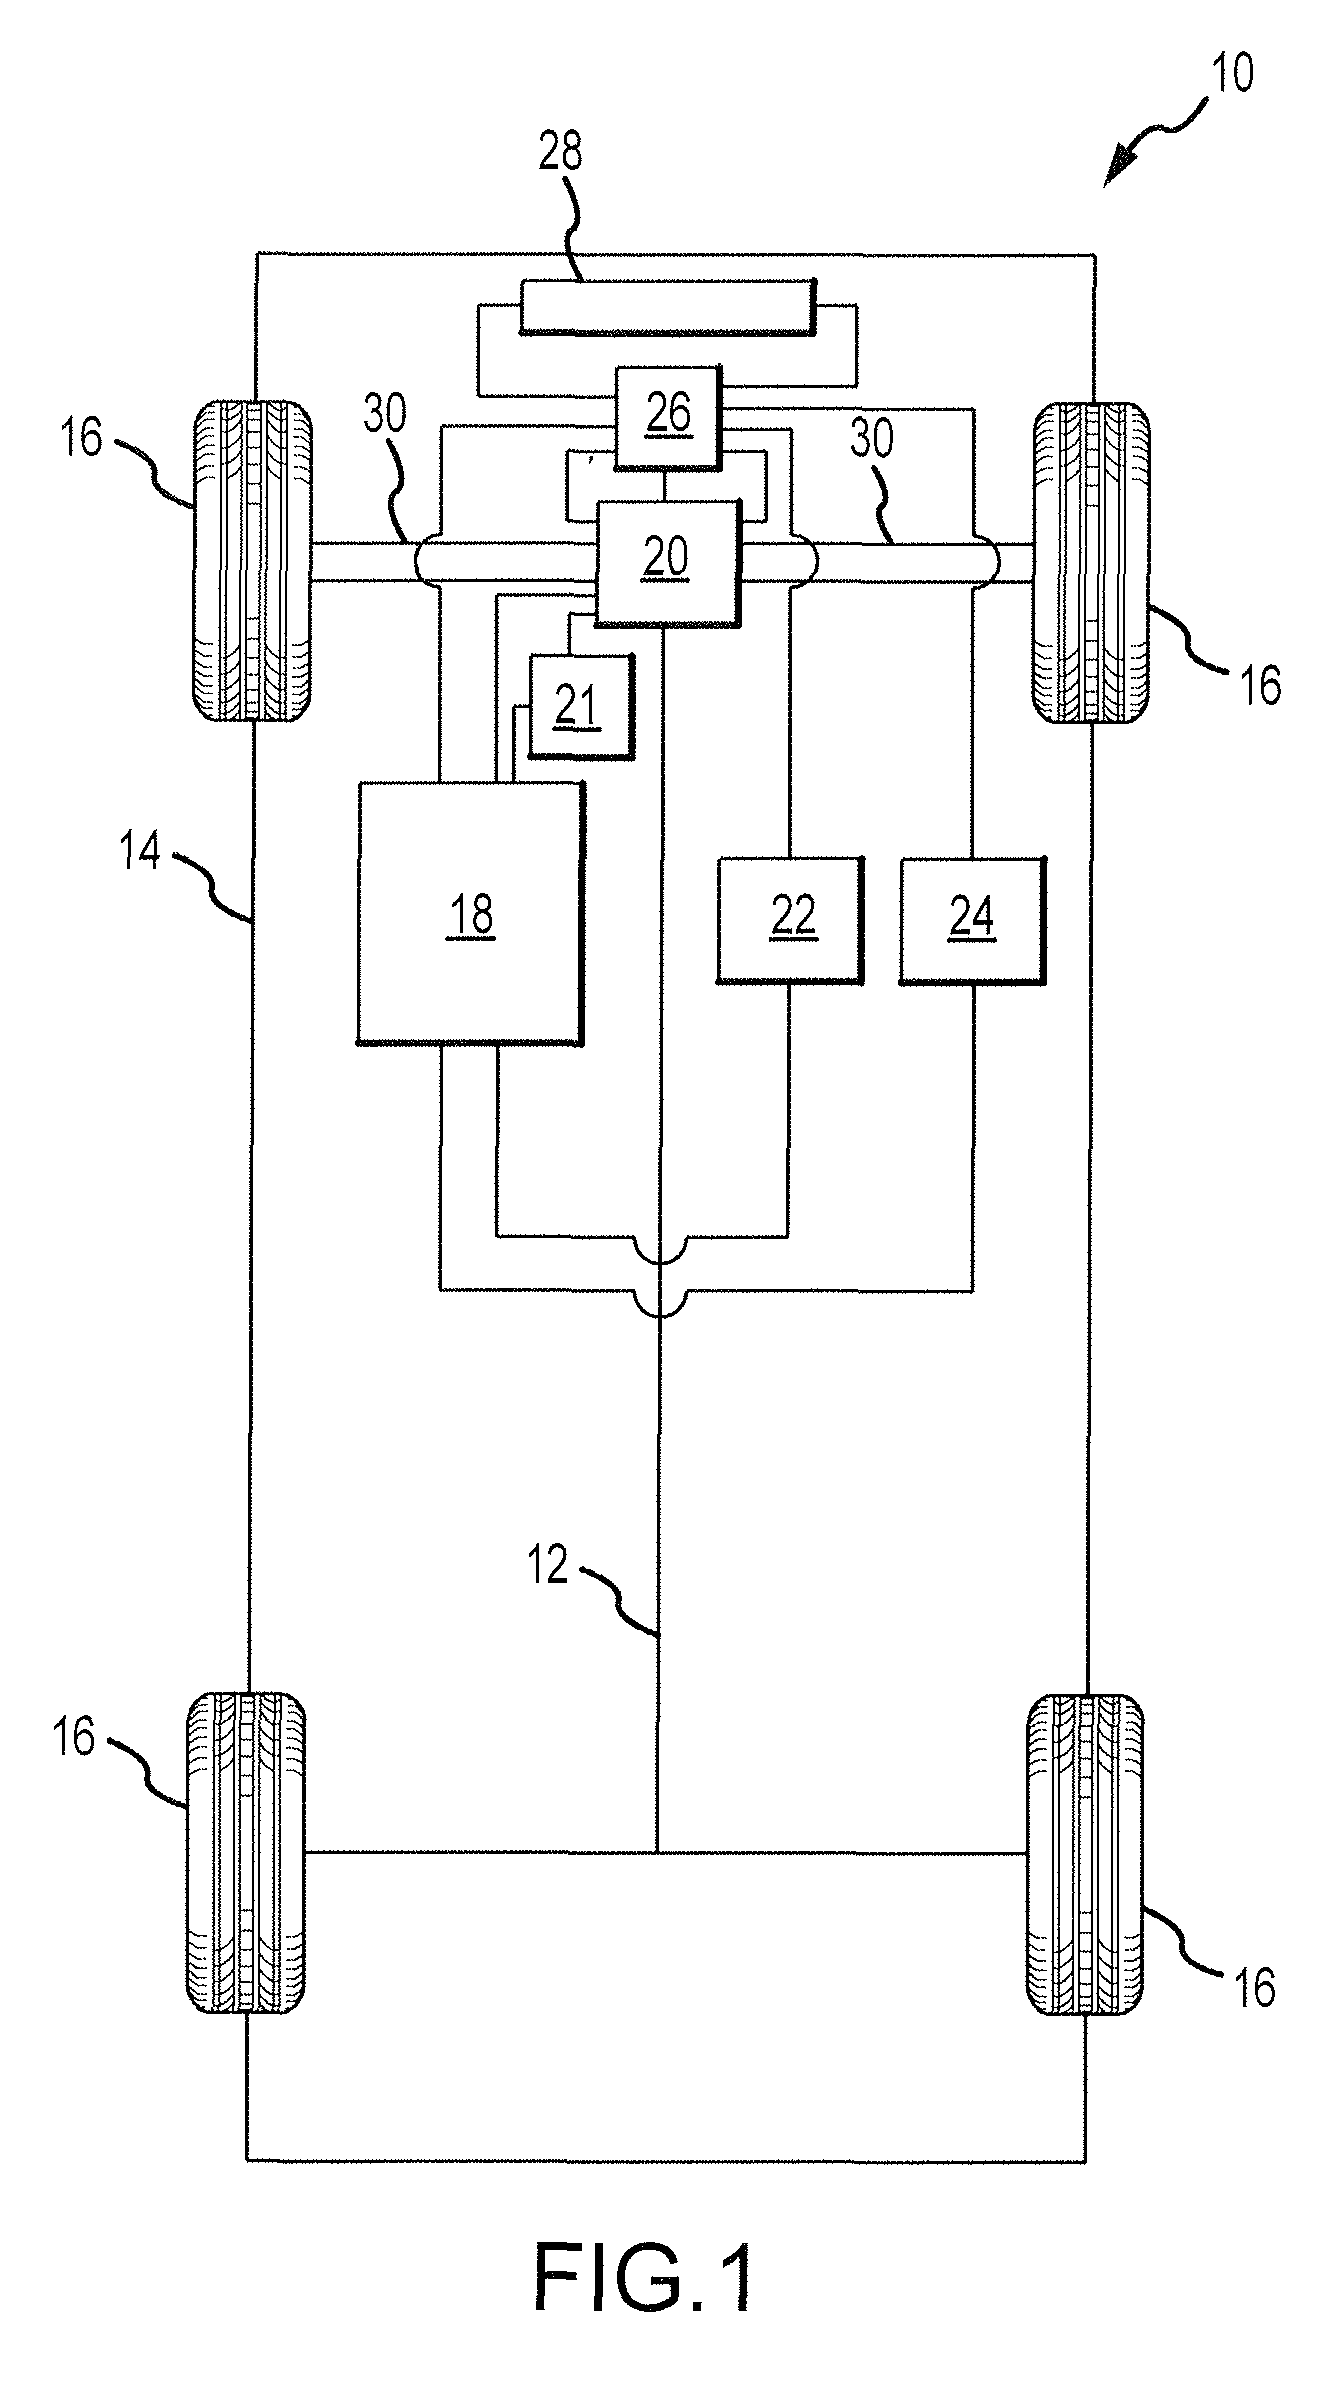 Series-coupled two-motor drive using double-ended inverter system